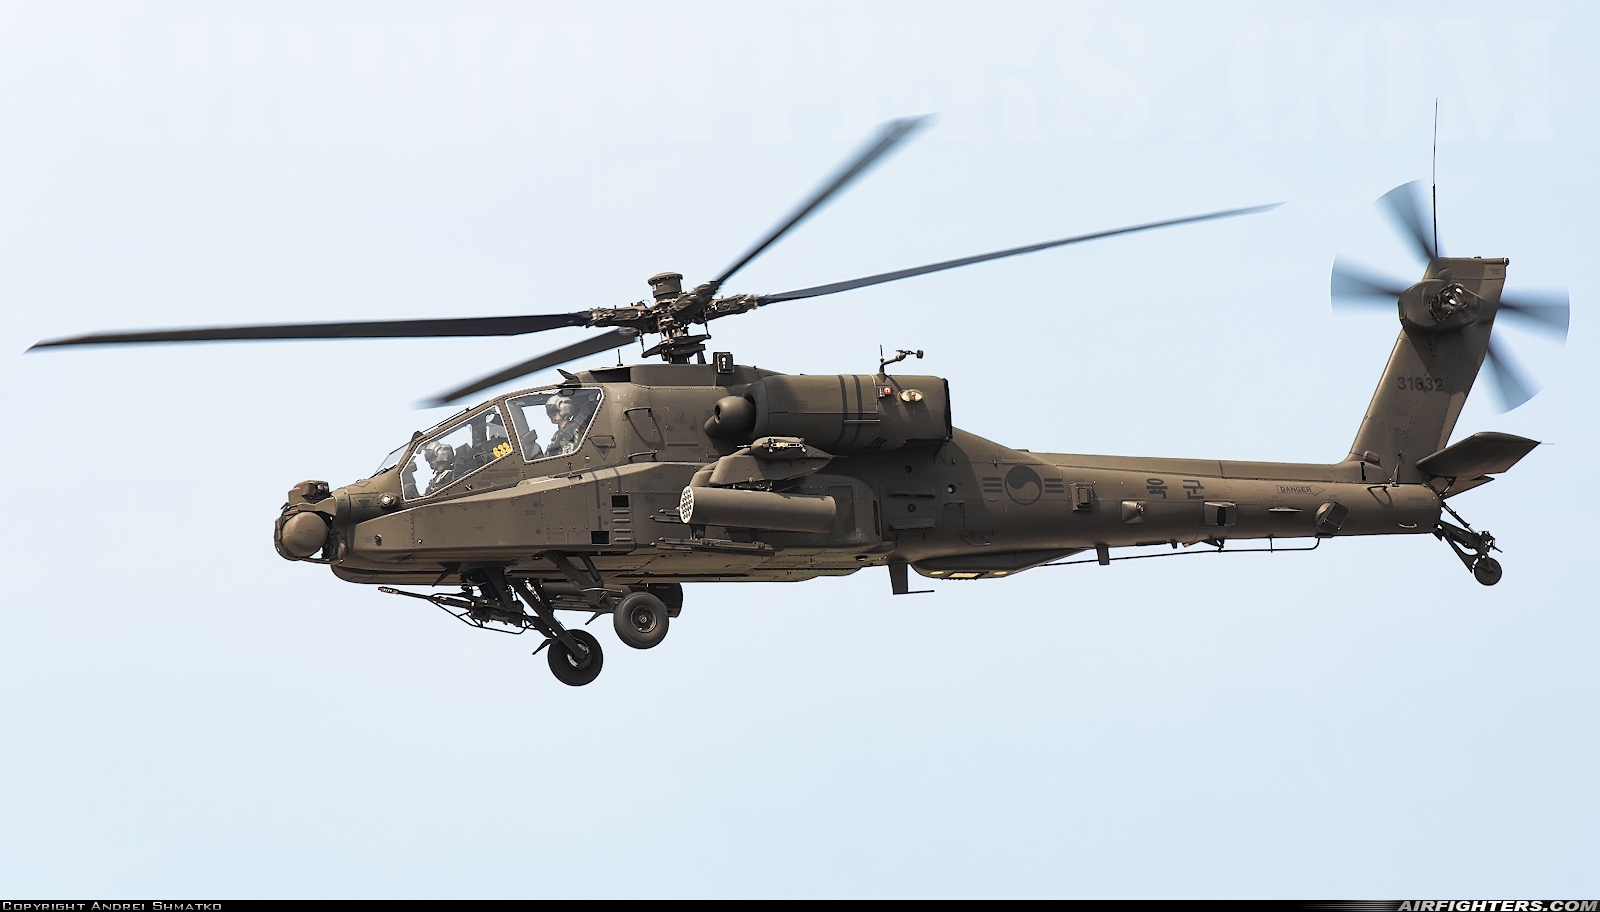 South Korea - Army Boeing AH-64E Apache Guardian 31632 at Withheld, South Korea